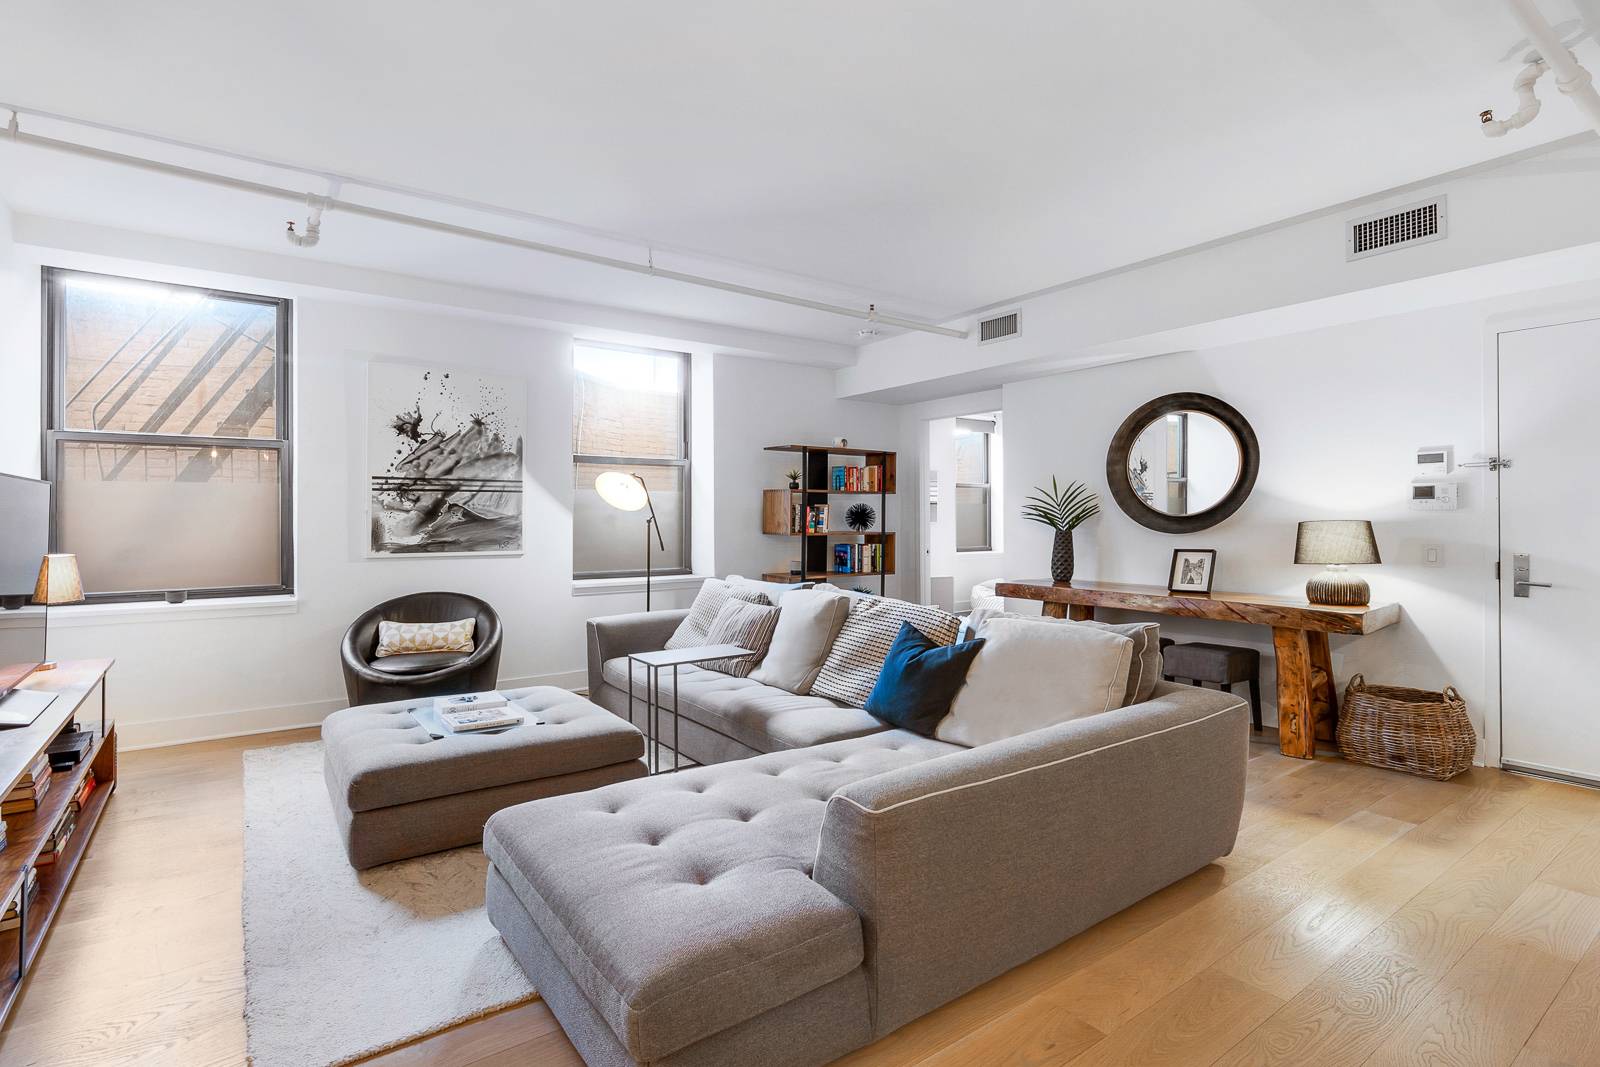 Fabulous 3 bedroom 2 bath at 133 Mulberry Street in Nolita, available now for 12 months or longer.